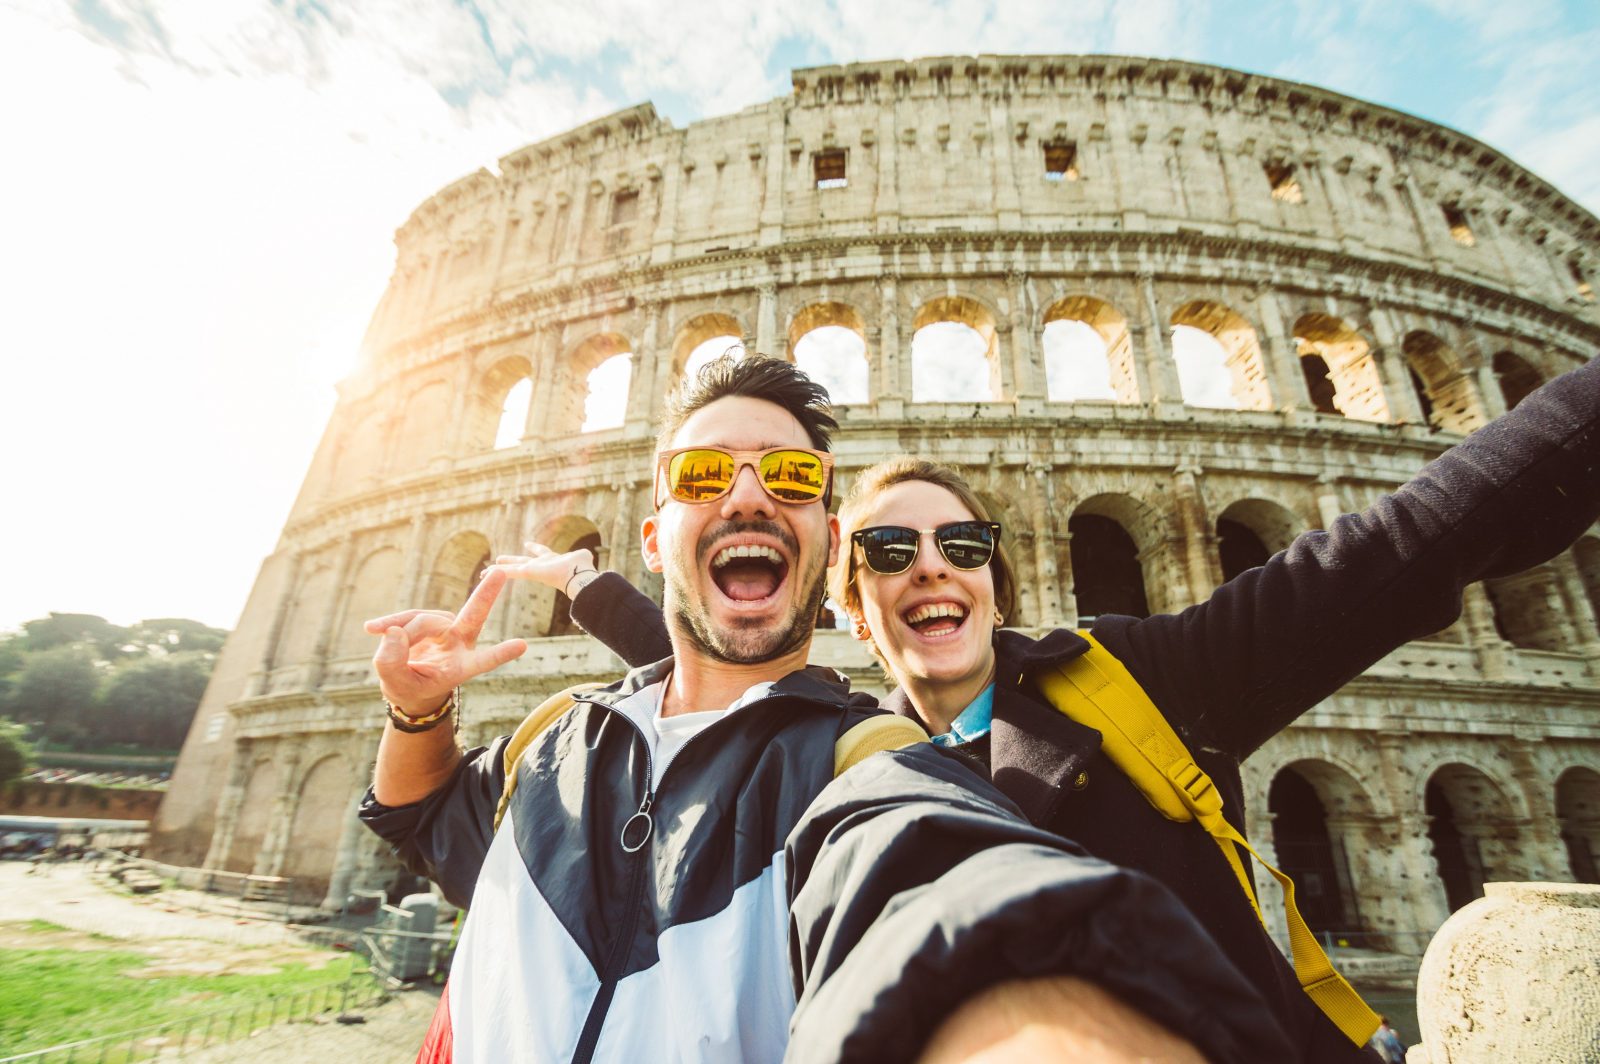 Travel to Italy for a Weekend and We’ll Predict What Your Life Will Be Like in 5 Years Tourists Taking Selfie In Rome, Italy